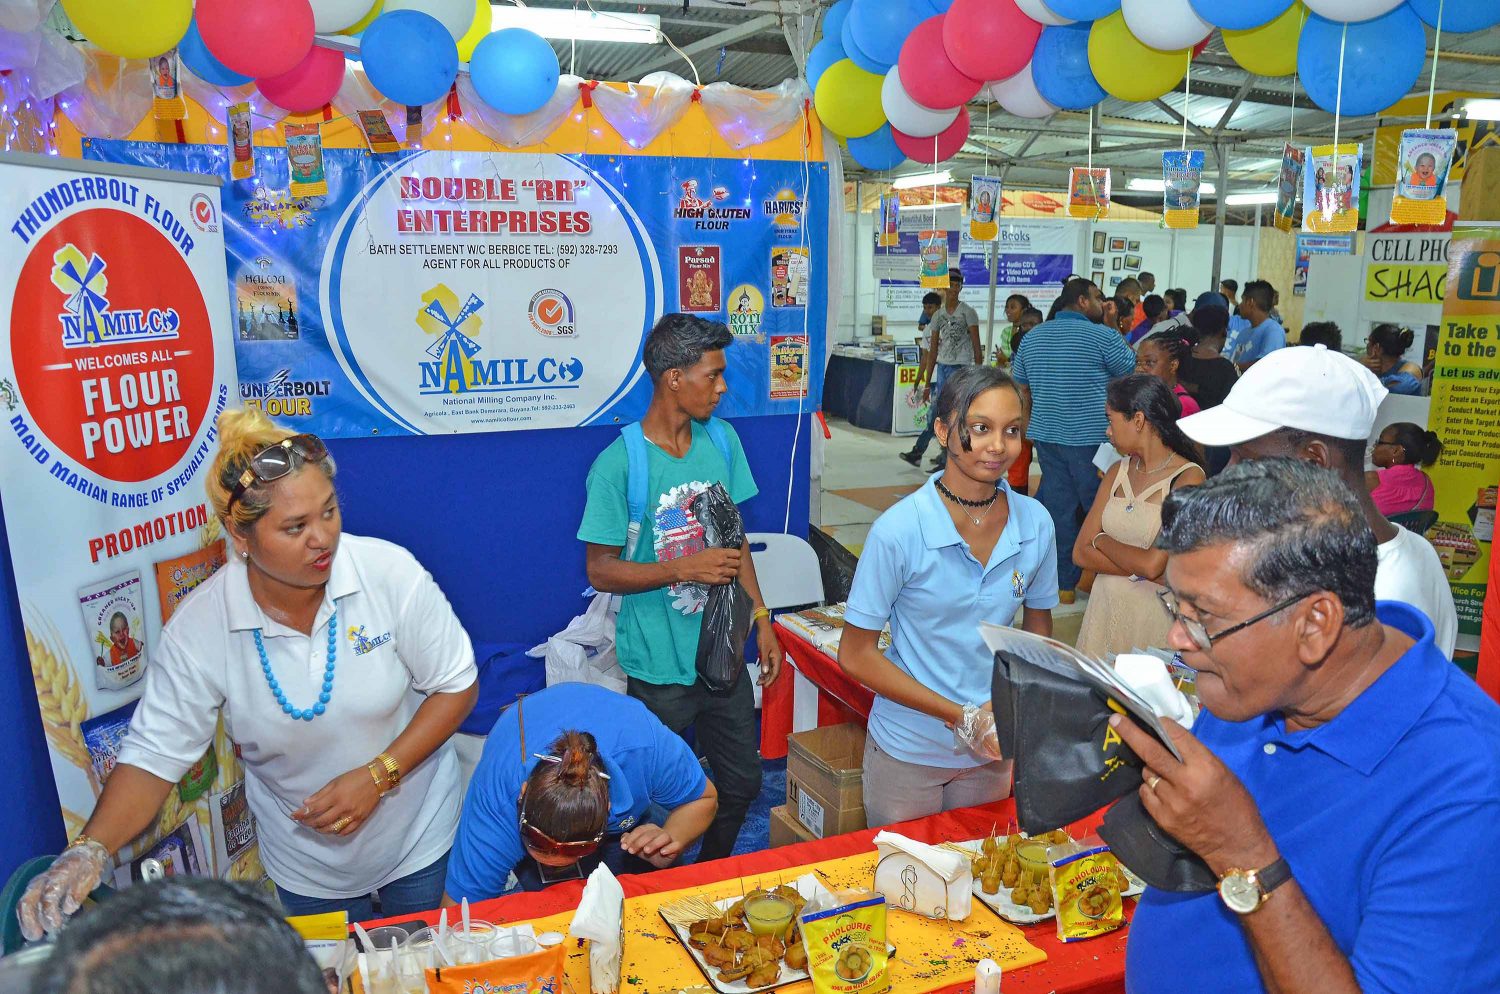  NAMILCO took eighteen different flour-based products to the Berbice Expo.
